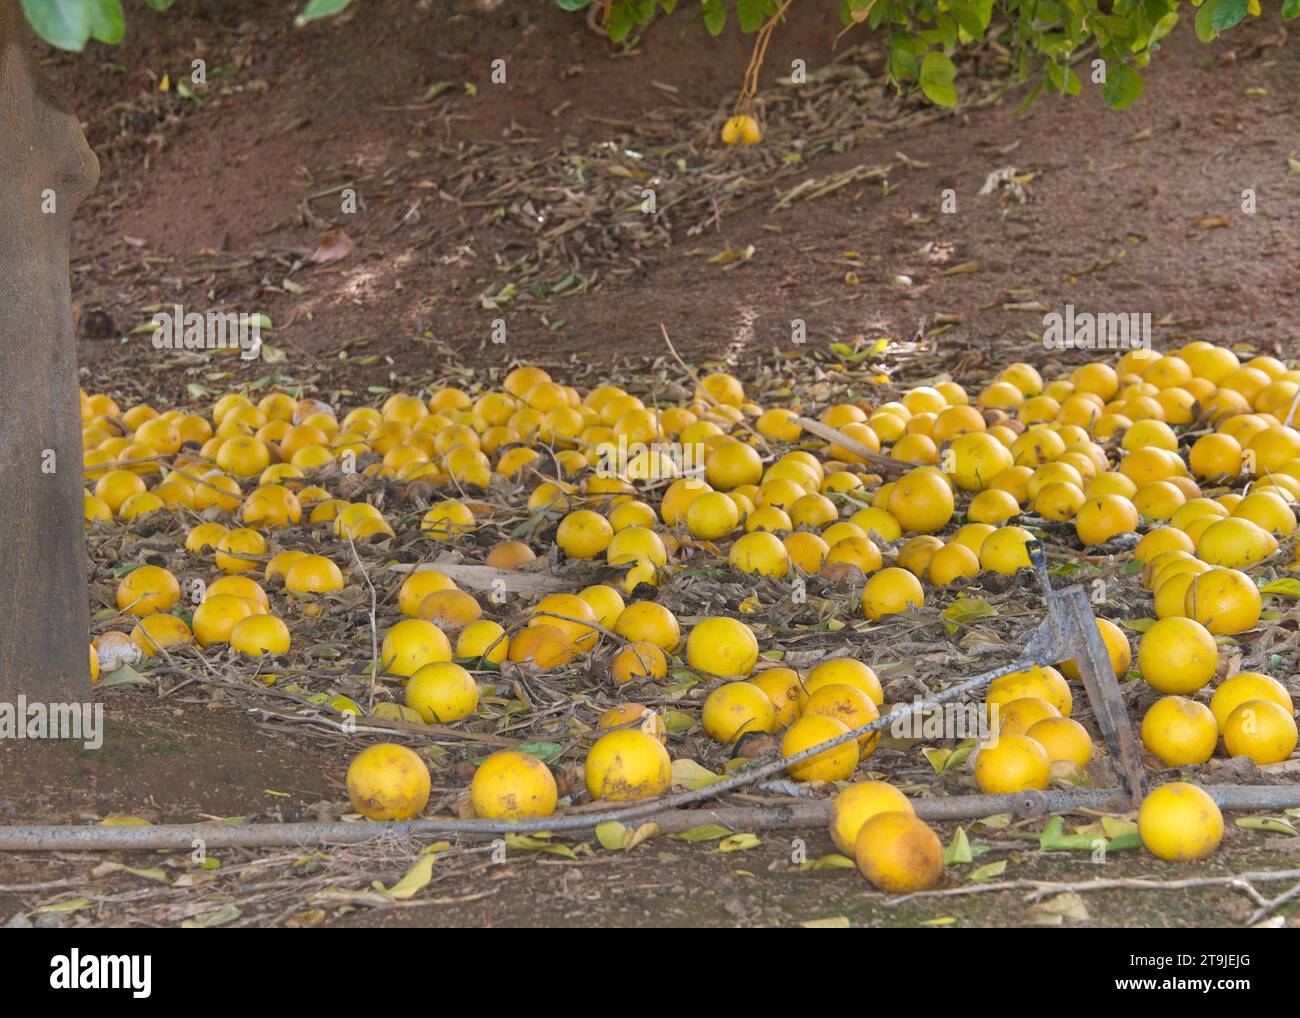 Carrizo Citrange Trifoliate Hybrid fruit, fallen from the tree, rotting on the ground. Stock Photo